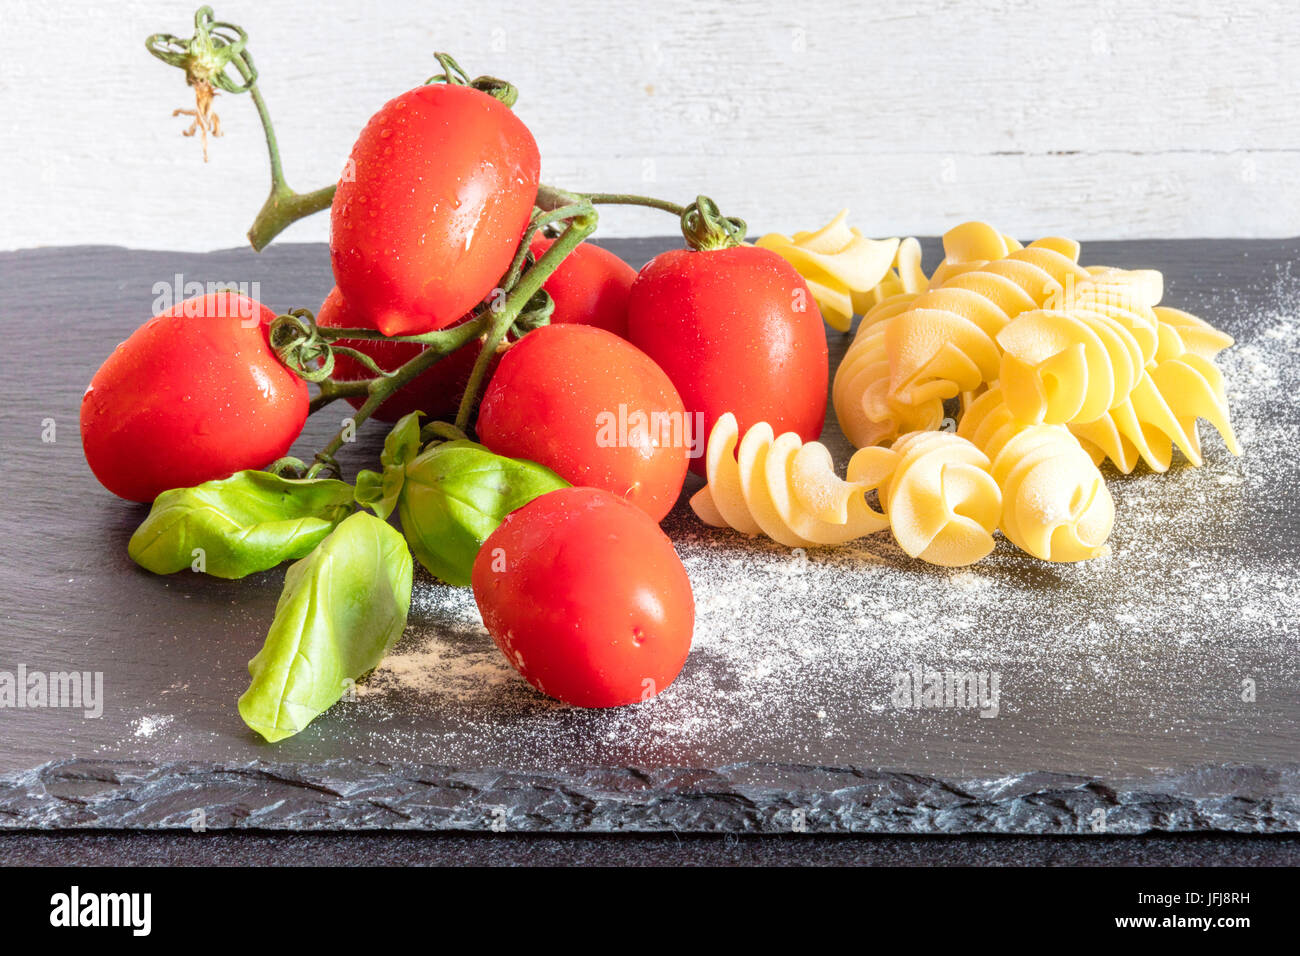 Fusilli fresh tomatoes and basil the ingredients for a typical dish of Italian pasta Stock Photo